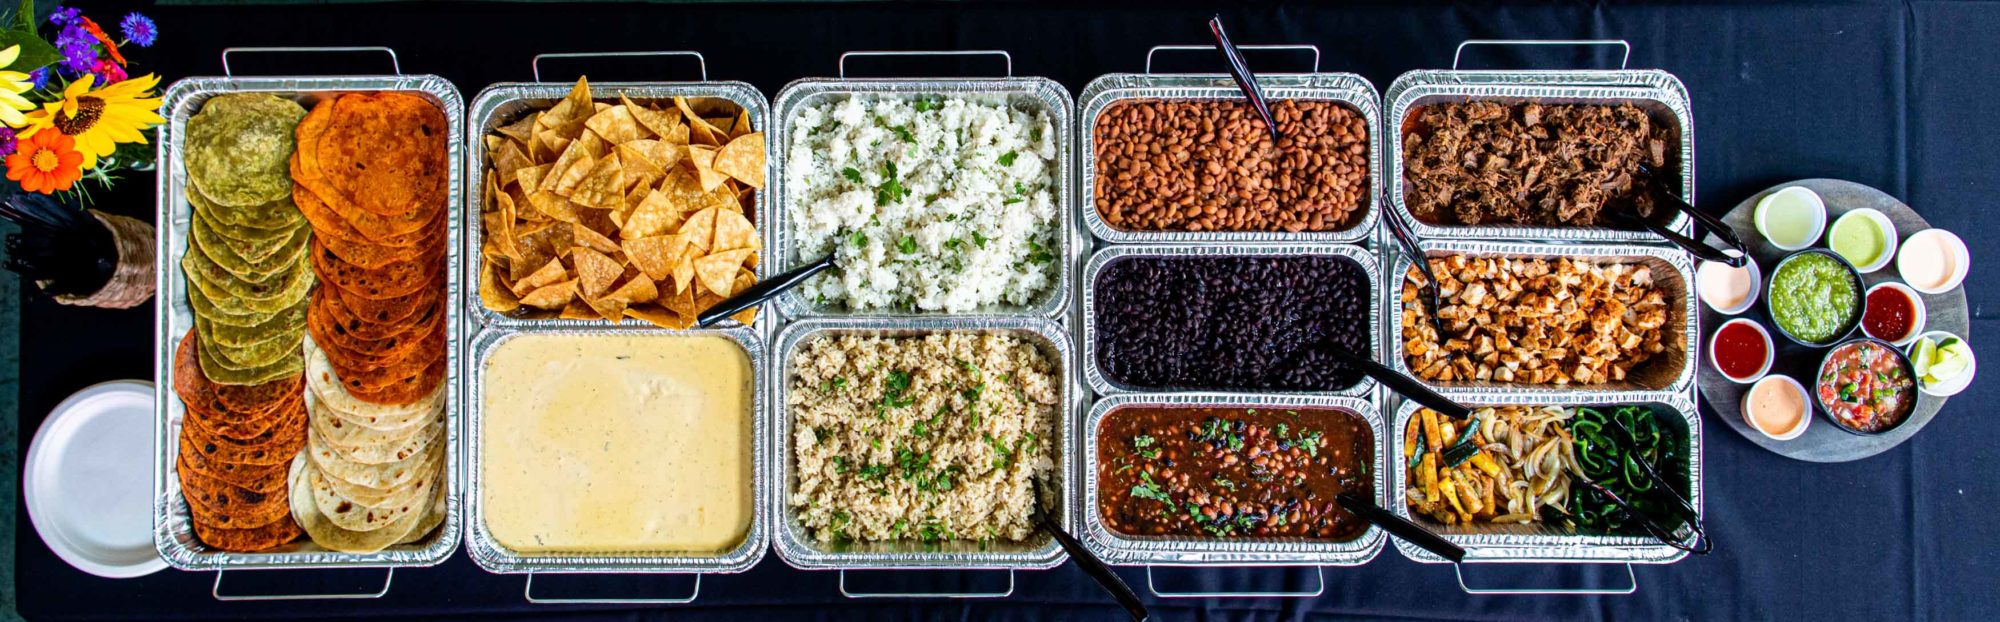 Catering trays filled with food.